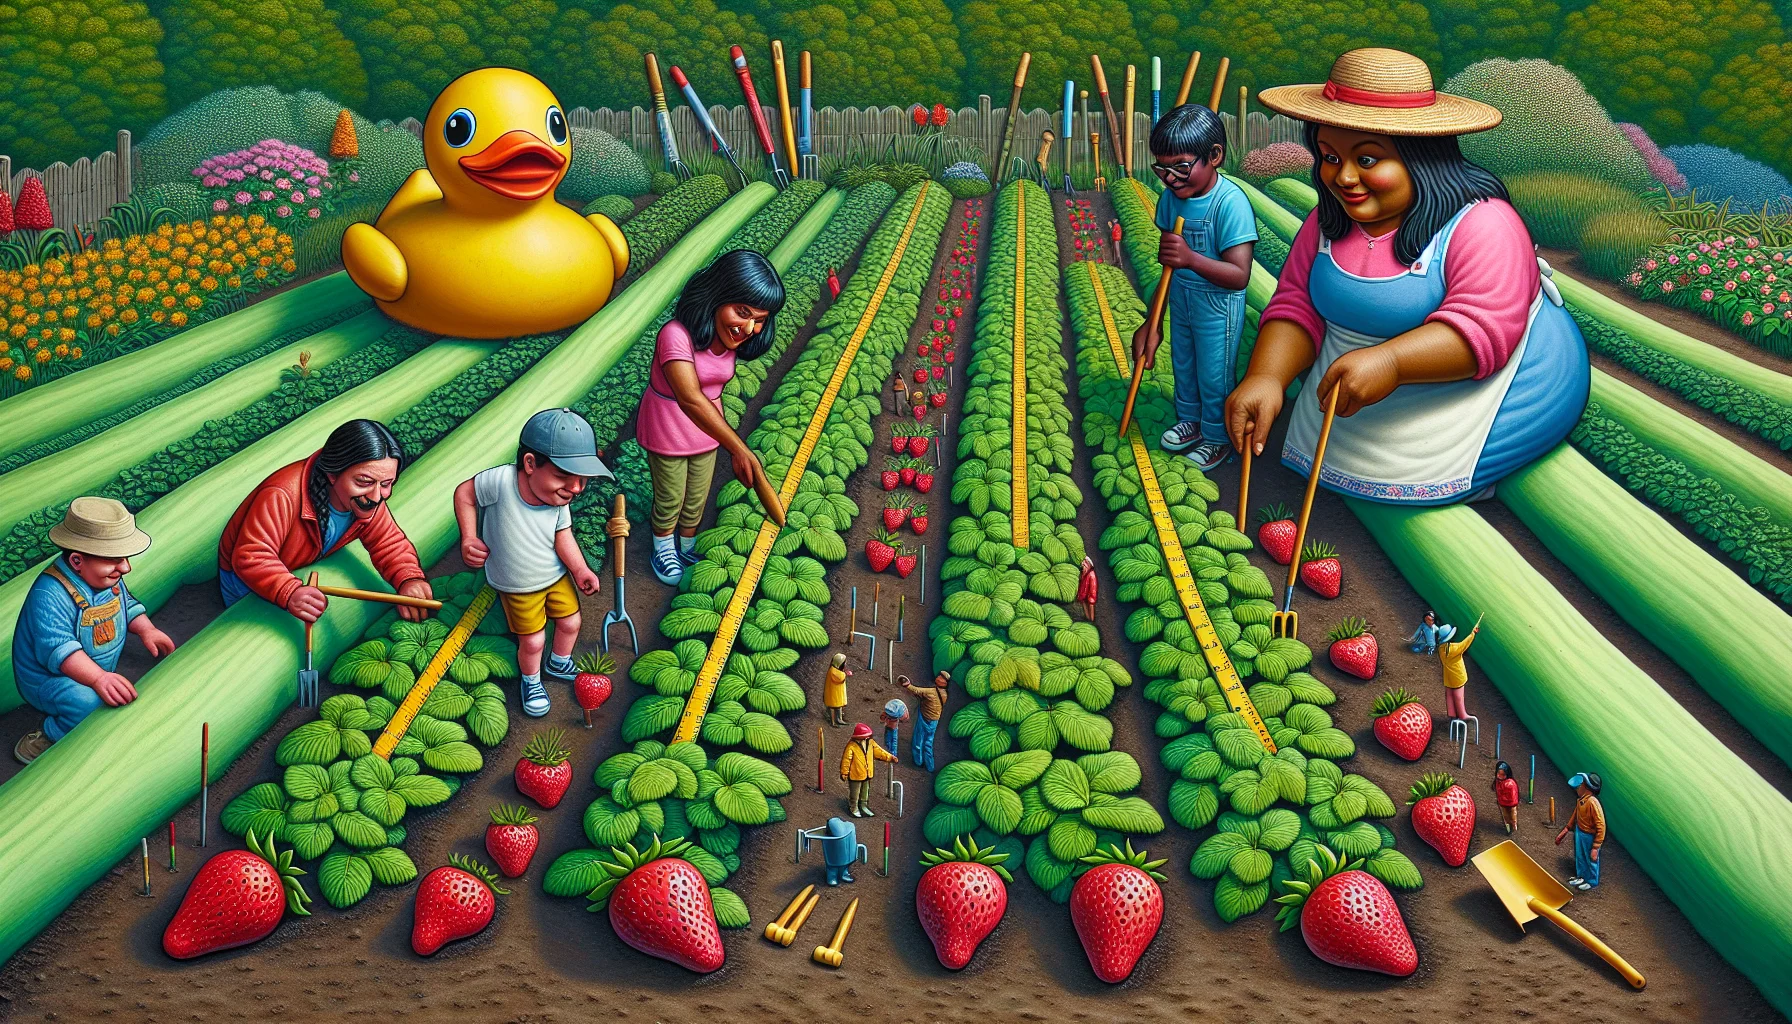 A whimsical, detailed scene of a garden. A family, consisting of a middle-aged Hispanic woman, a South Asian teenager and a black child, are engaging in gardening. Laid out in front of them are rows of strawberry plants. The rows are humorously measured using quirky items like oversized rubber ducks and giant pencils instead of garden tools. The strawberry plants are spaced perfectly apart, illustrating a guide to proper strawberry planting. The expressions of the family members communicate joy and amusement, subtly enticing viewers to take part in the fun of gardening.